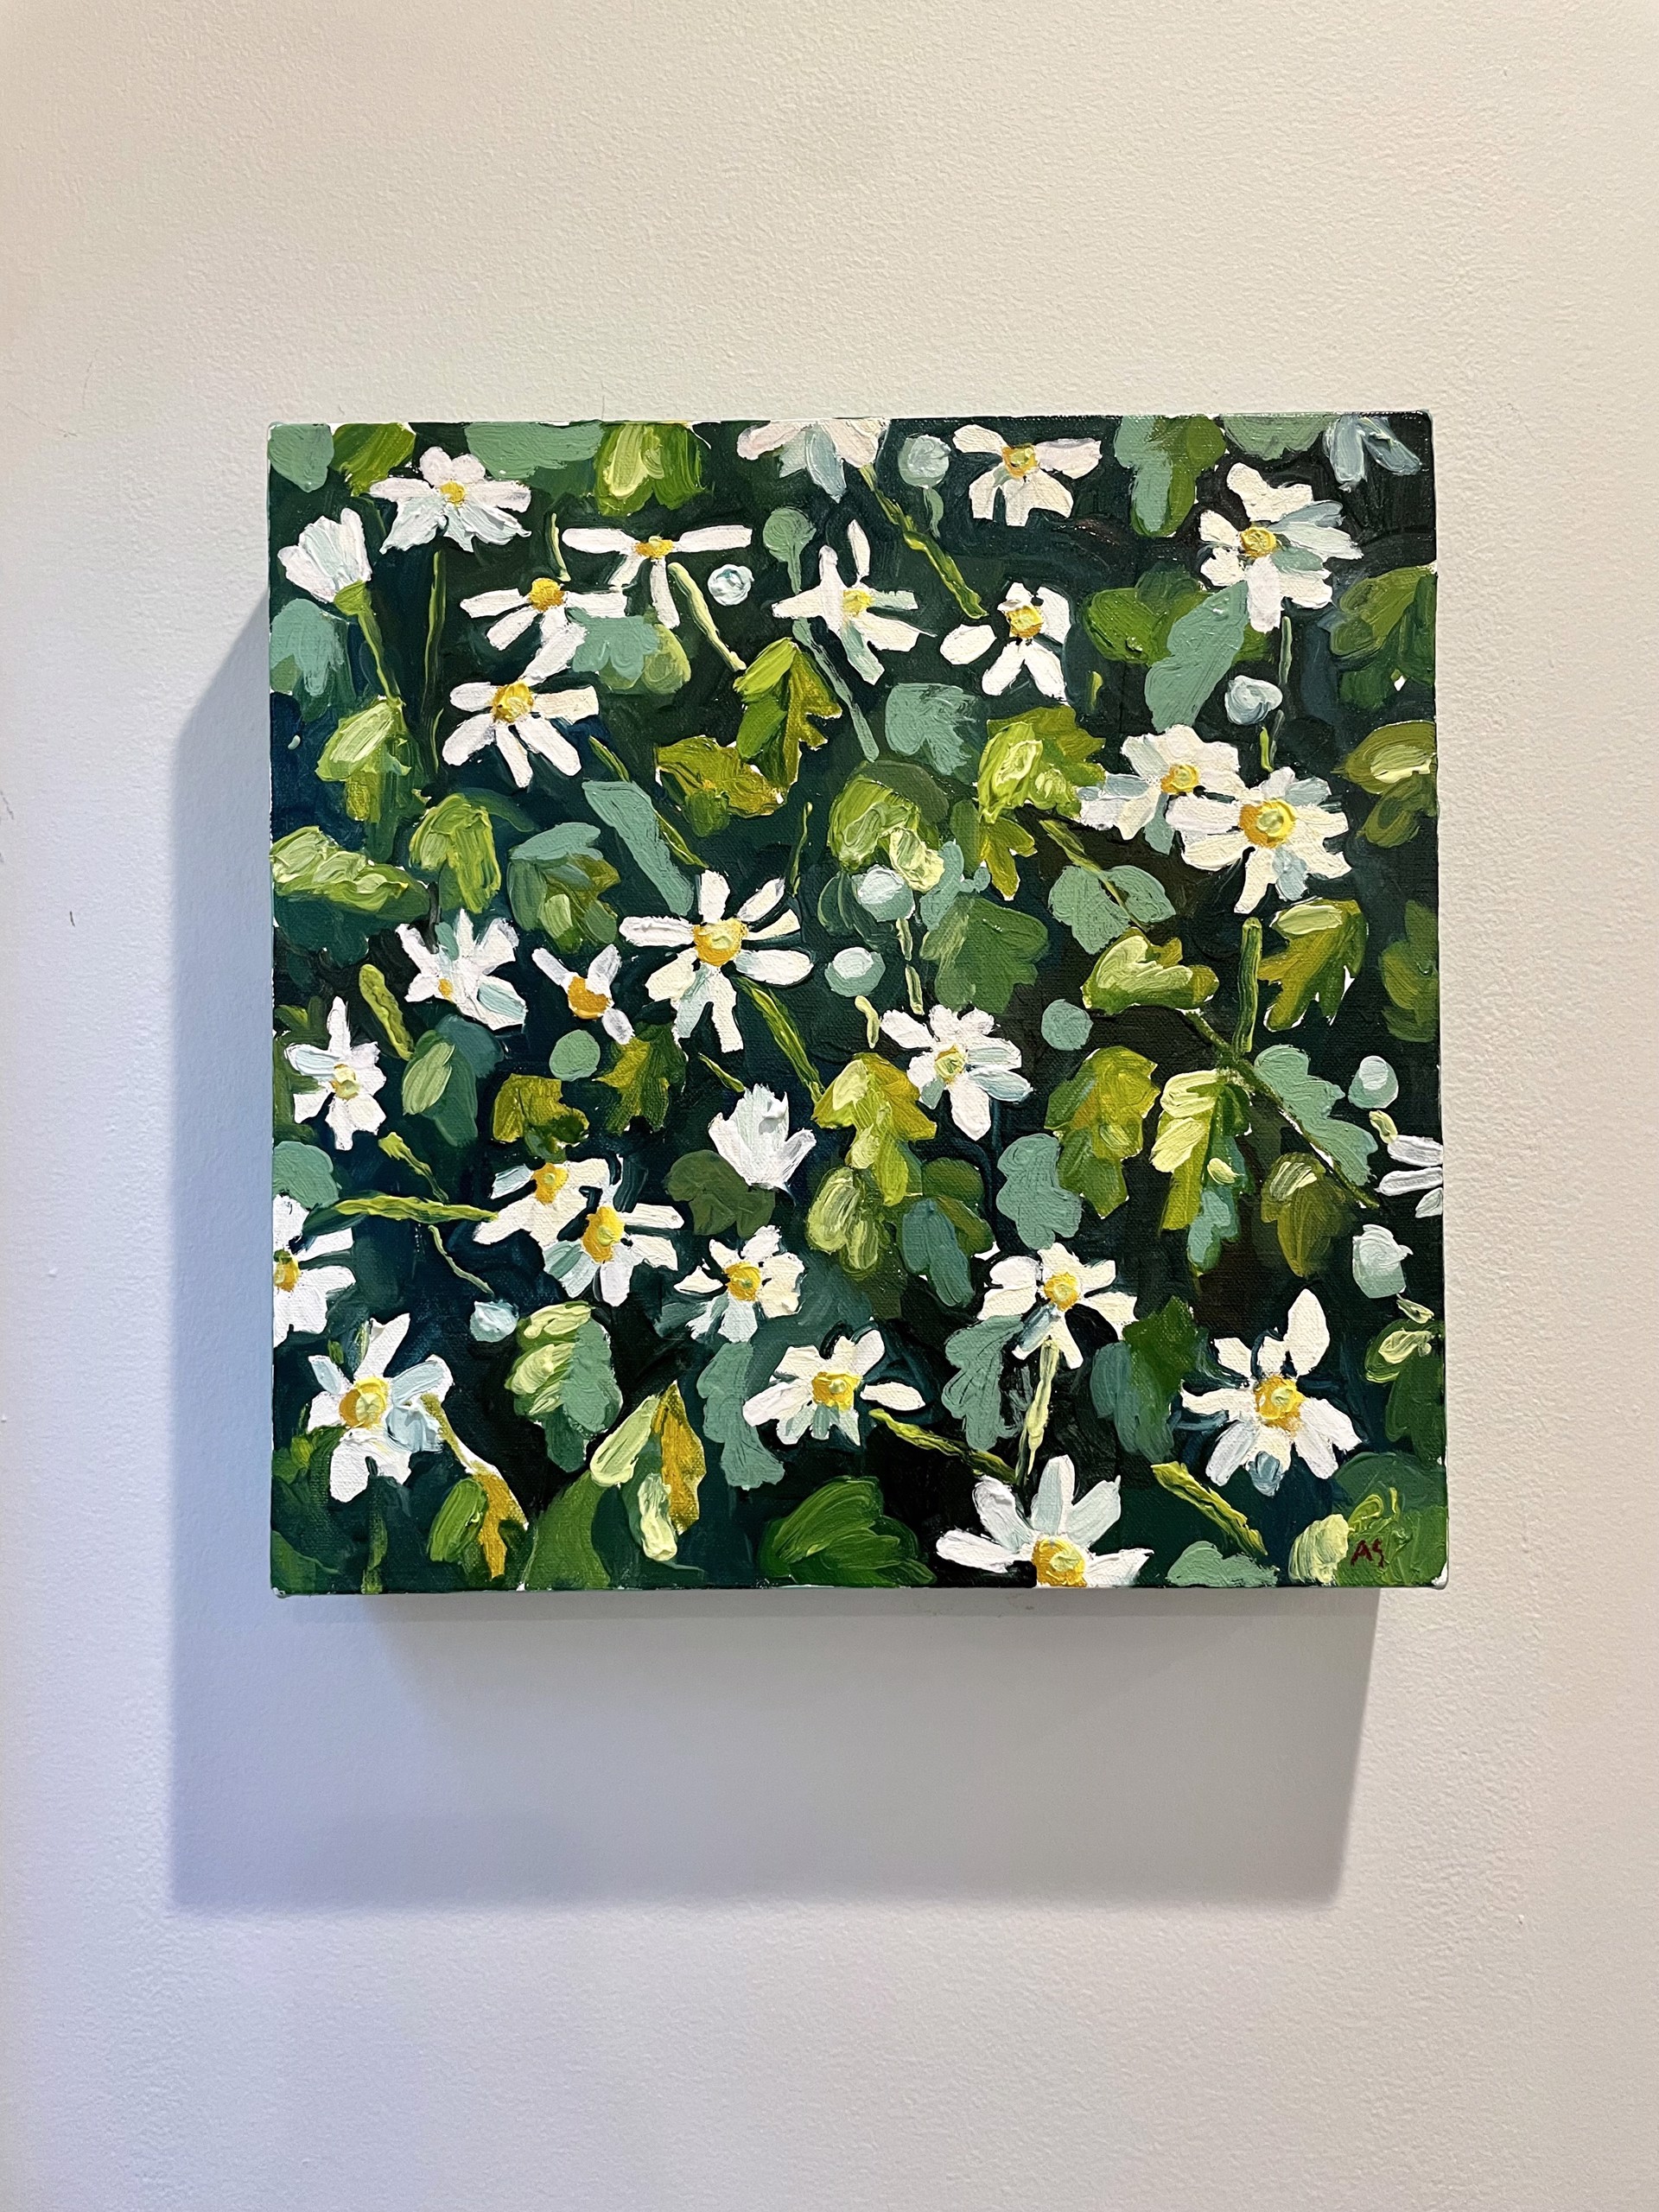 Daisies I by Avery Schuster